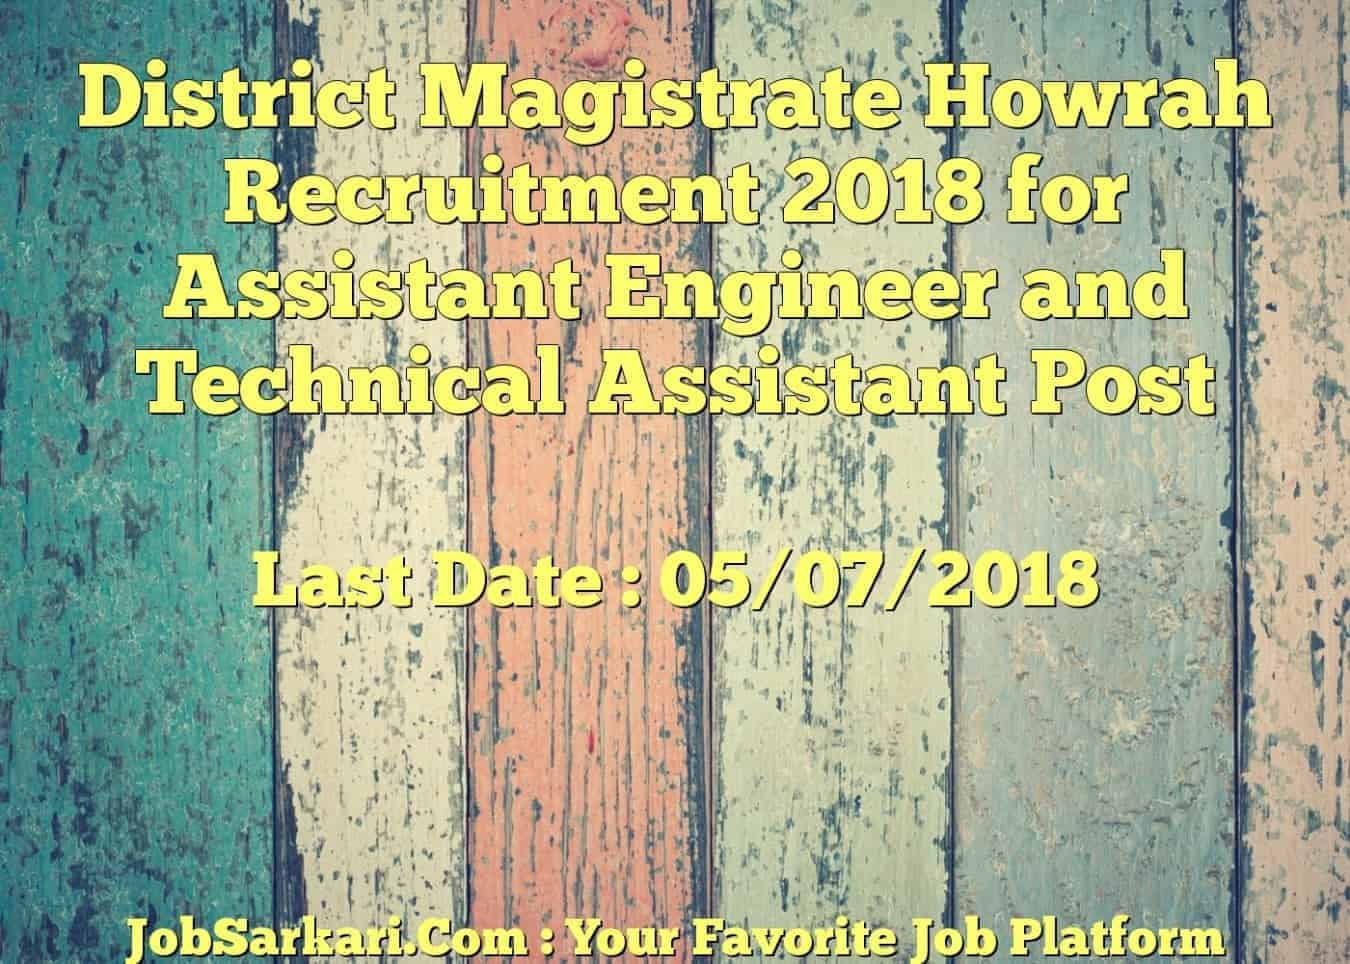 District Magistrate Howrah Recruitment 2018 for Assistant Engineer and Technical Assistant Post